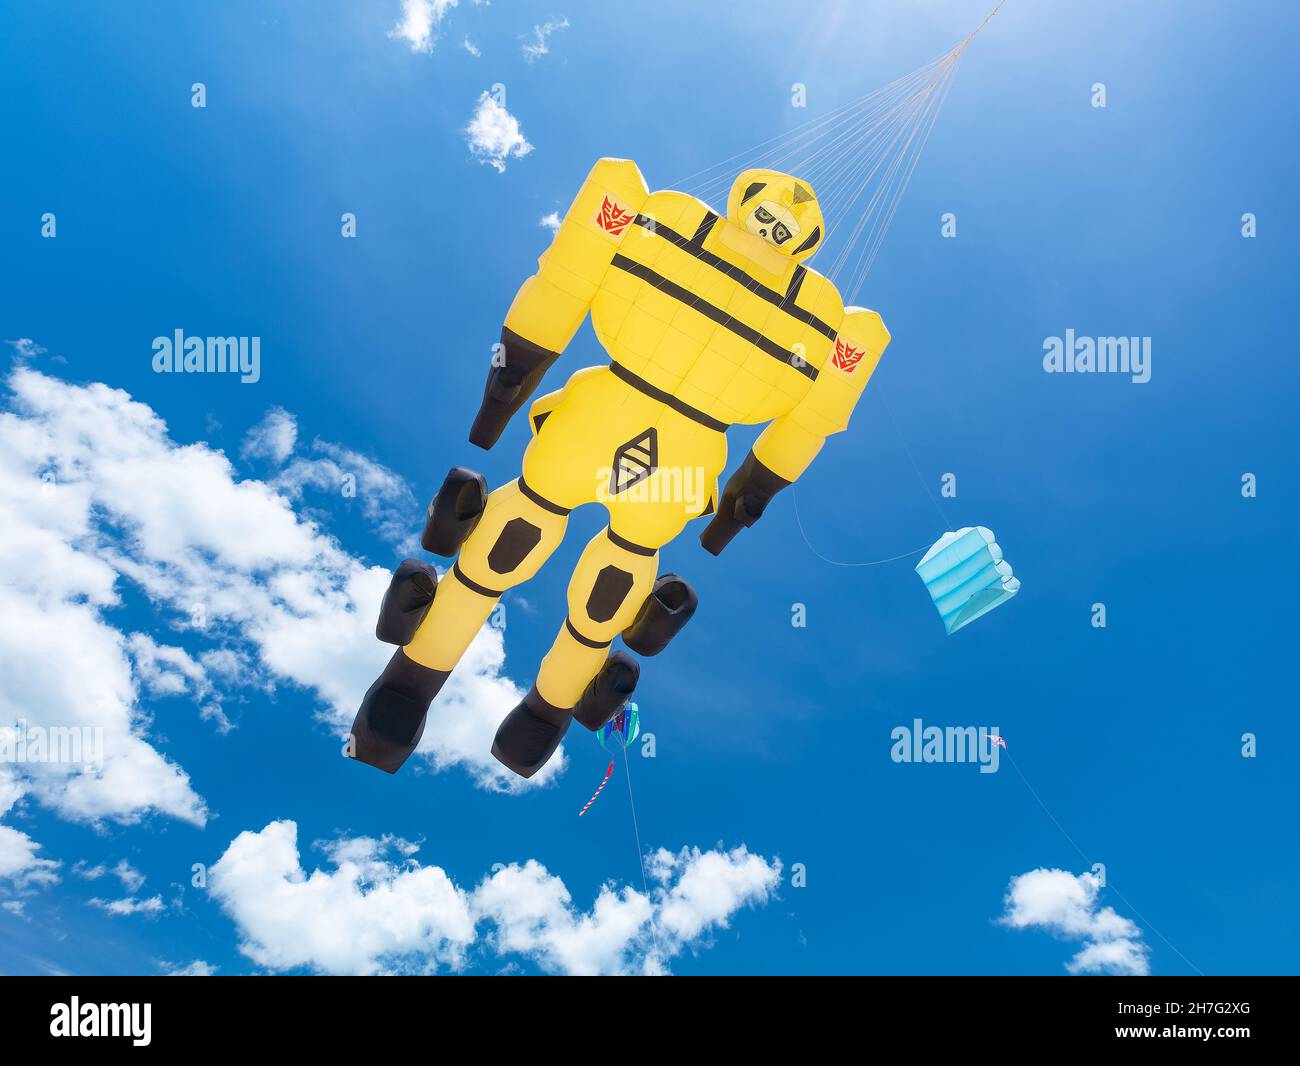 Large, yellow, inflatable kite shaped as a Transformer toy flying against a blue sky background at Surat Thani Kite Festival, 2-4 April in Surat Thani Stock Photo